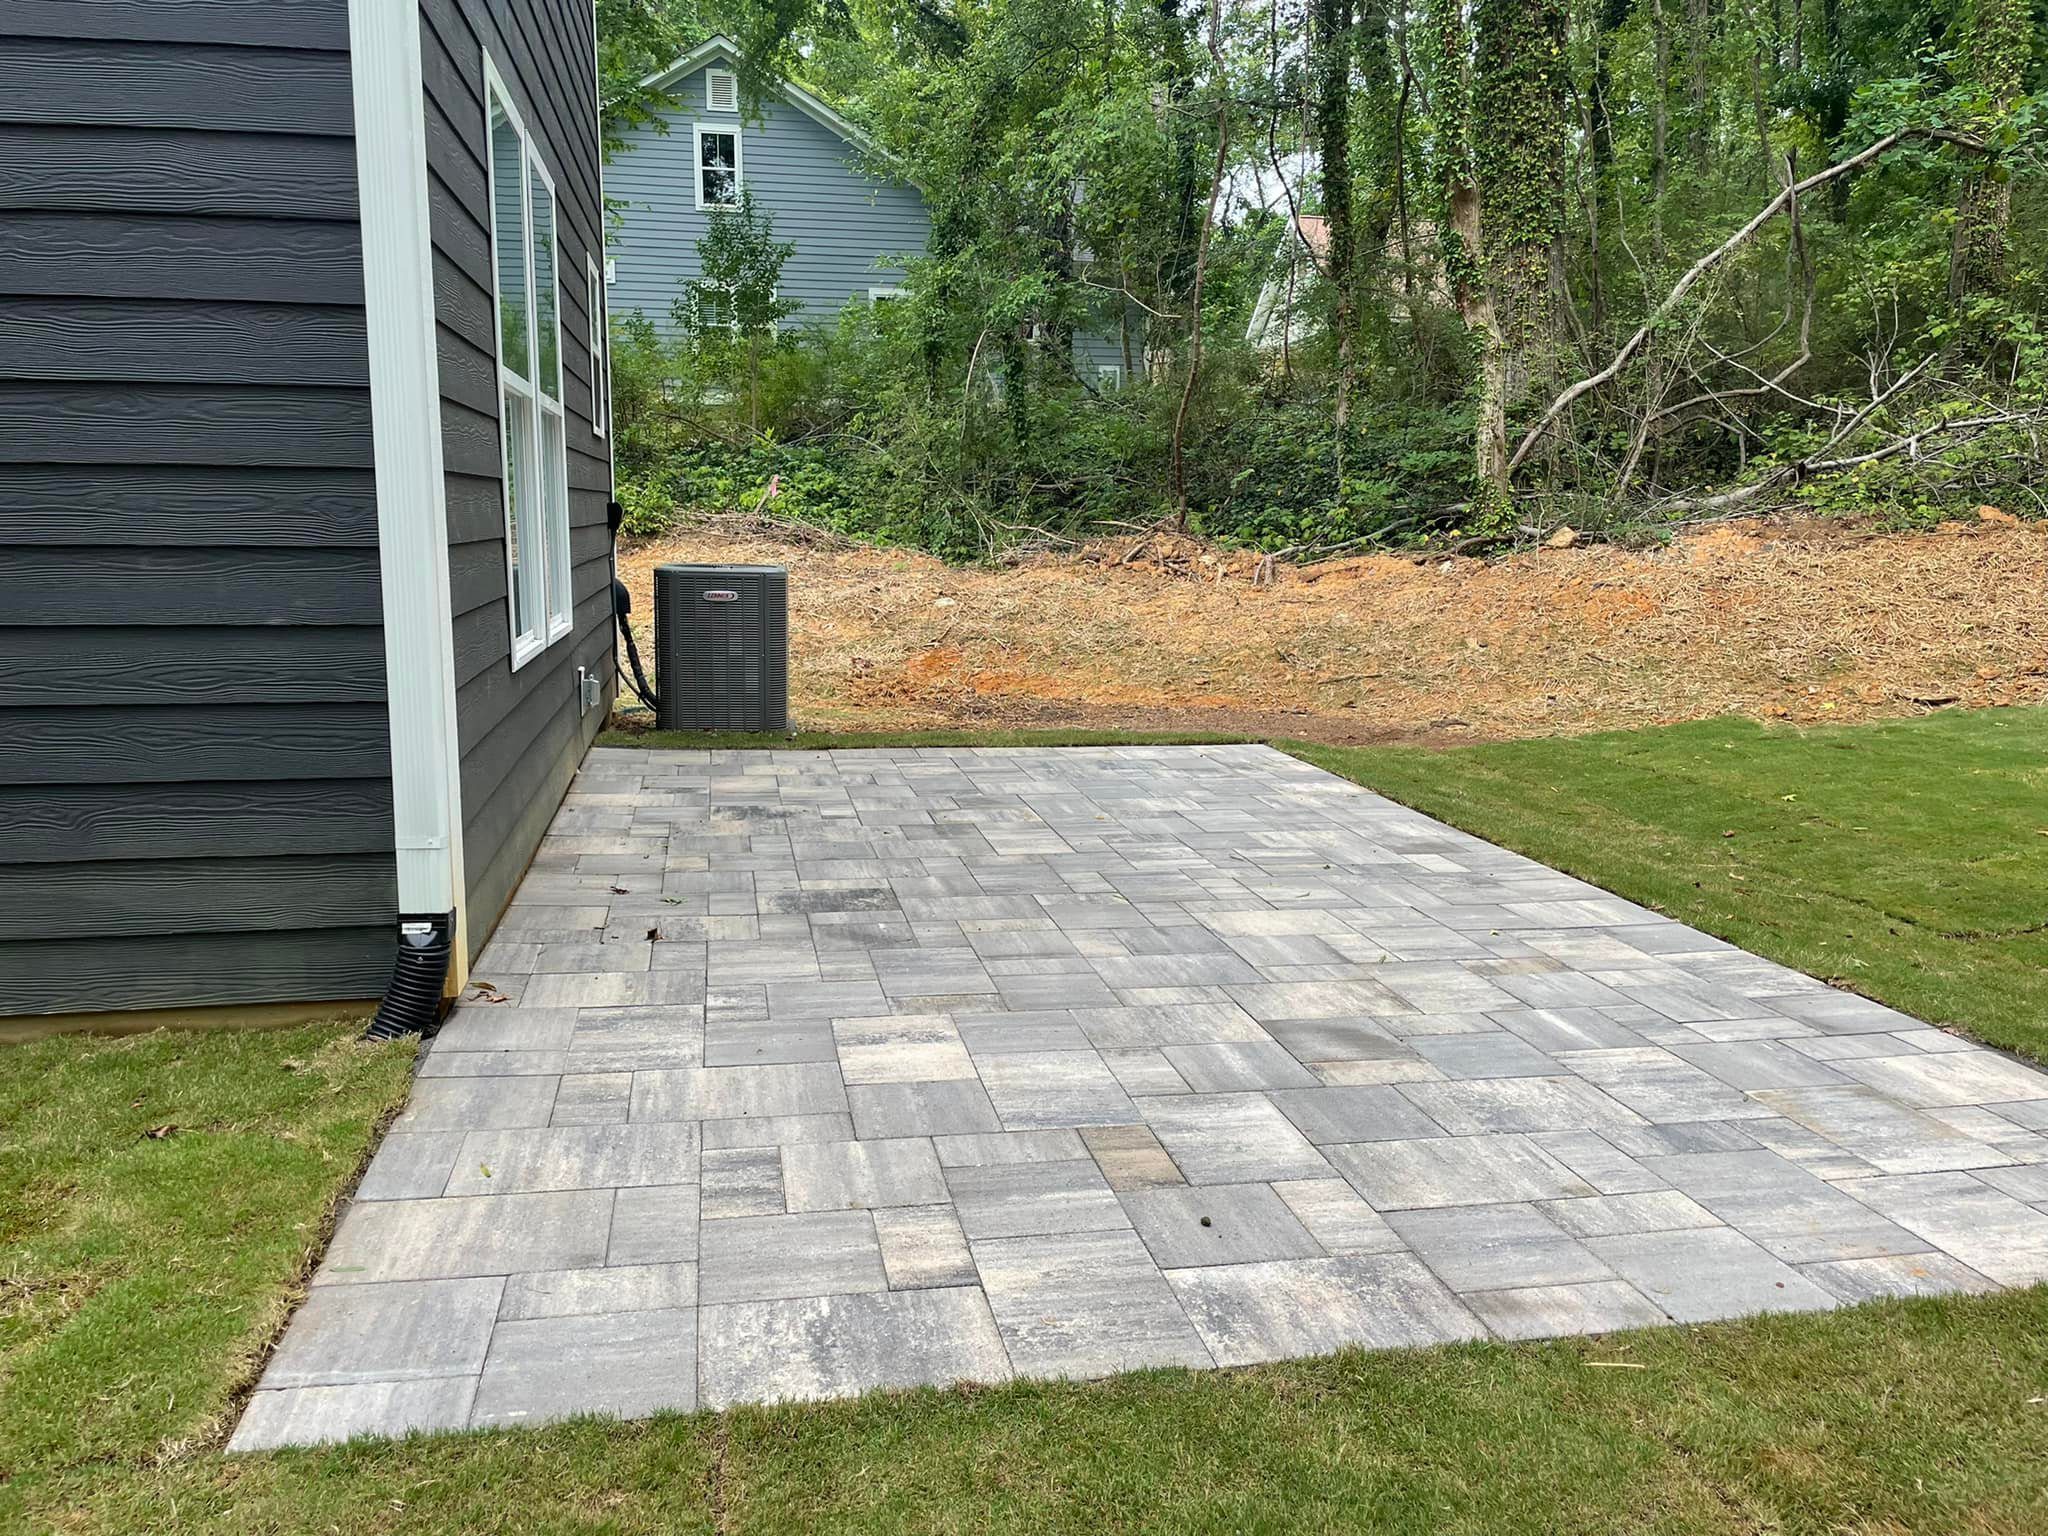 Belgard Magnolia Dimensions 12 Paver Patio – Outdoor Living Tip of the Day